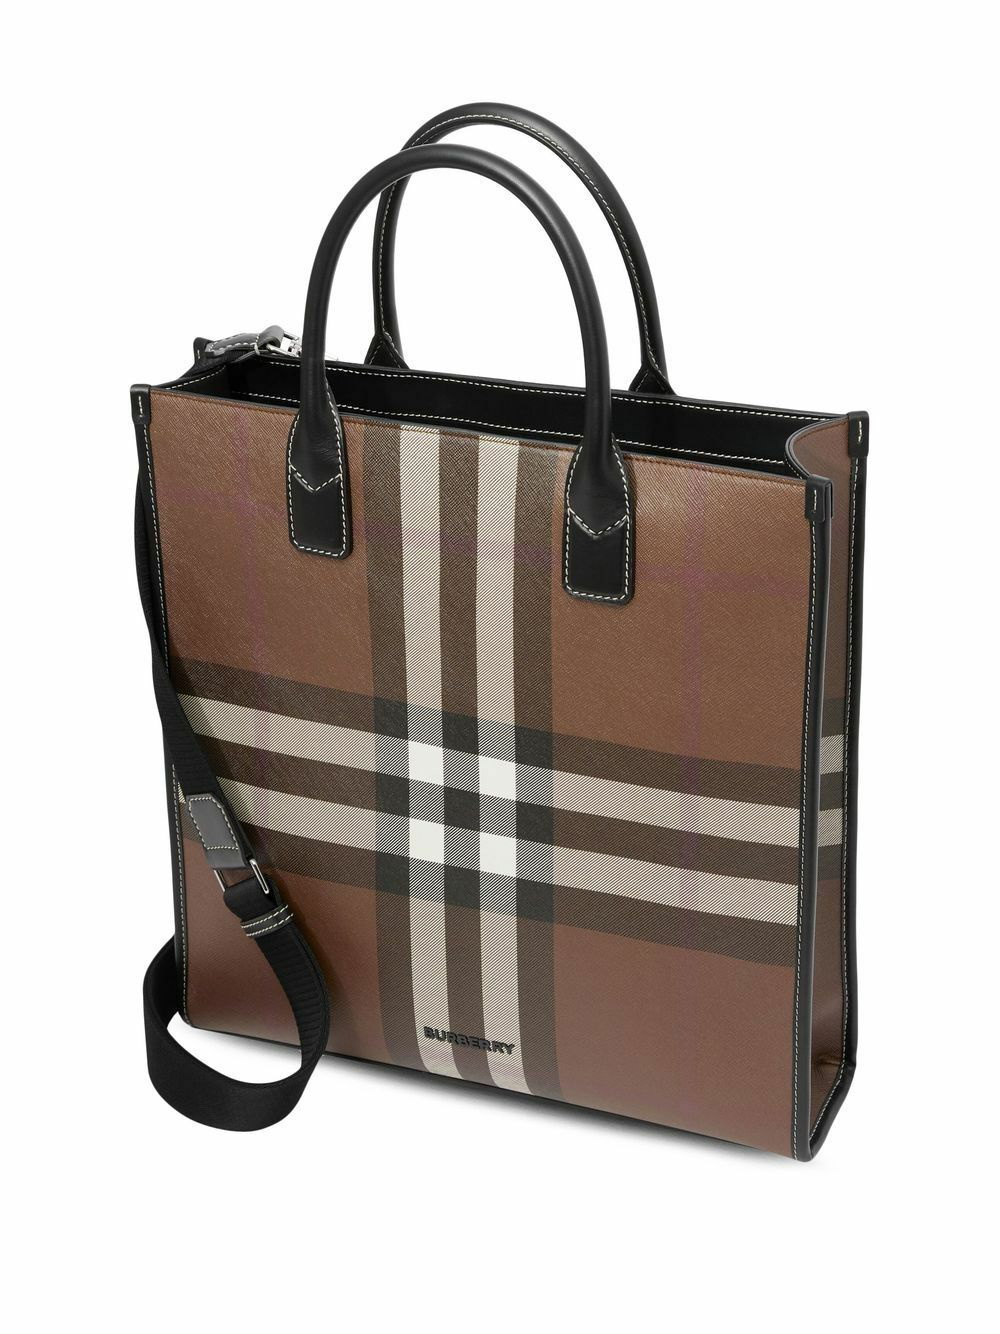 Burberry Men's Exaggerated Check Duffel Bag